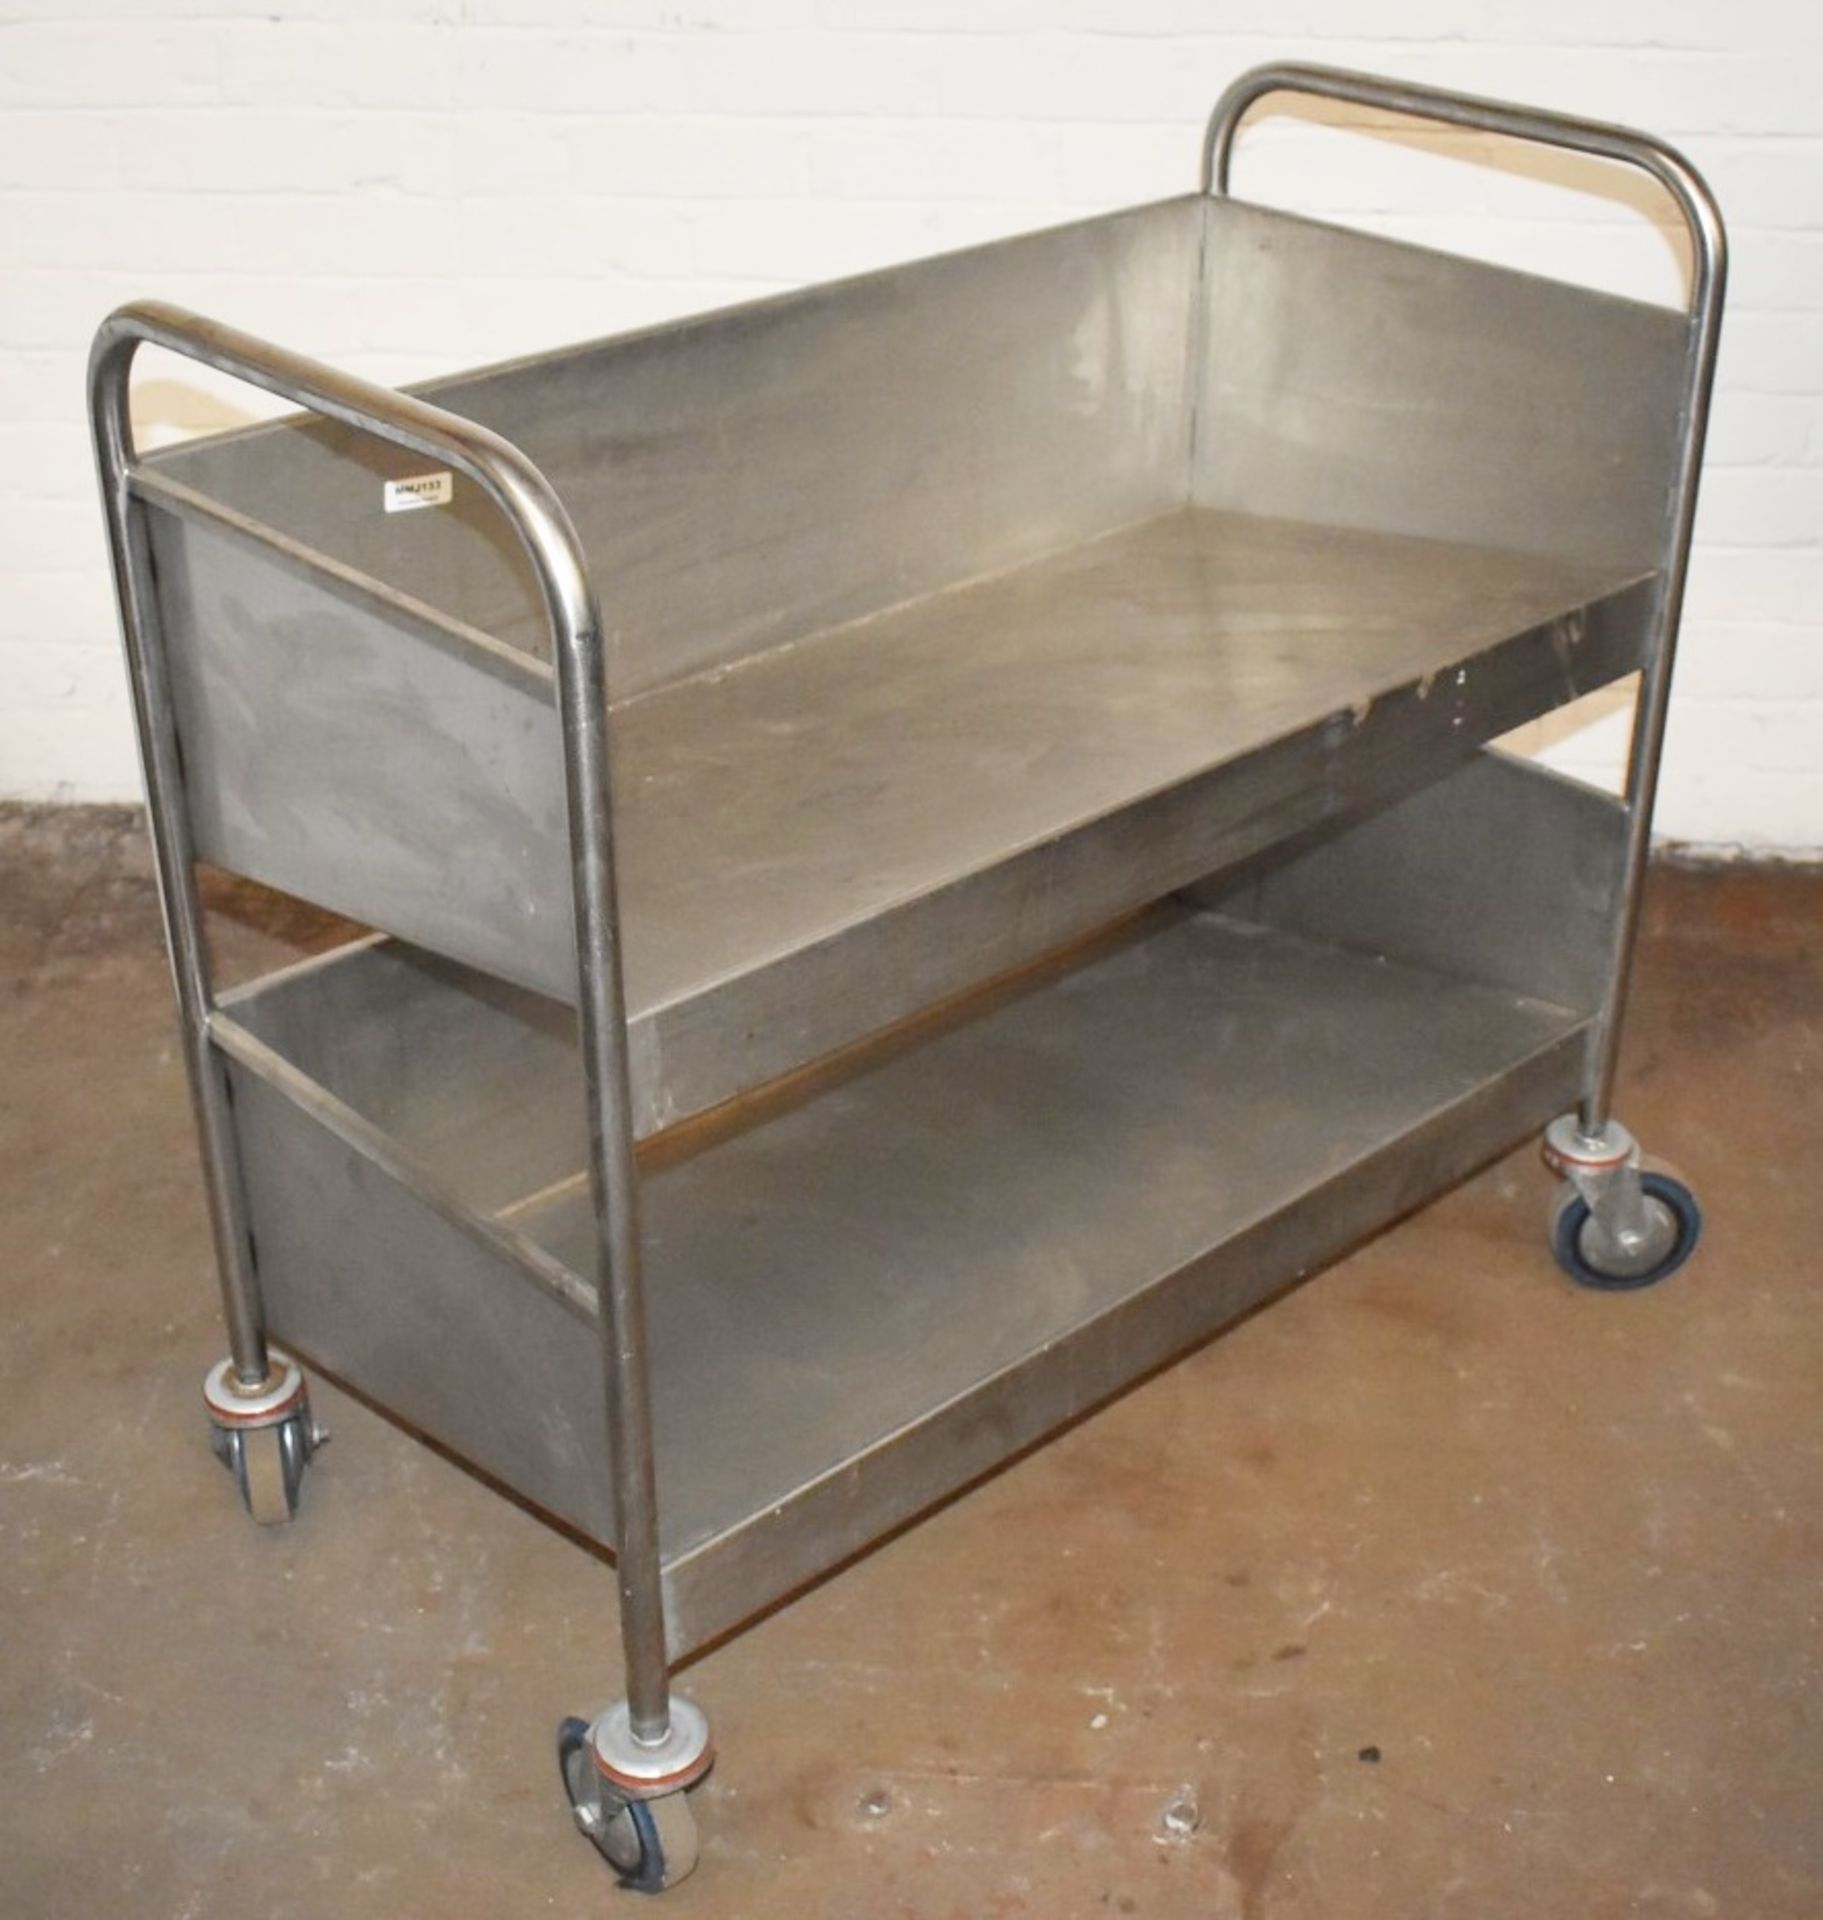 1 x Stainless Steel Trolley With Slanting Shelves and Heavy Duty Castors - Dimensions: H98 x W103 - Image 3 of 6